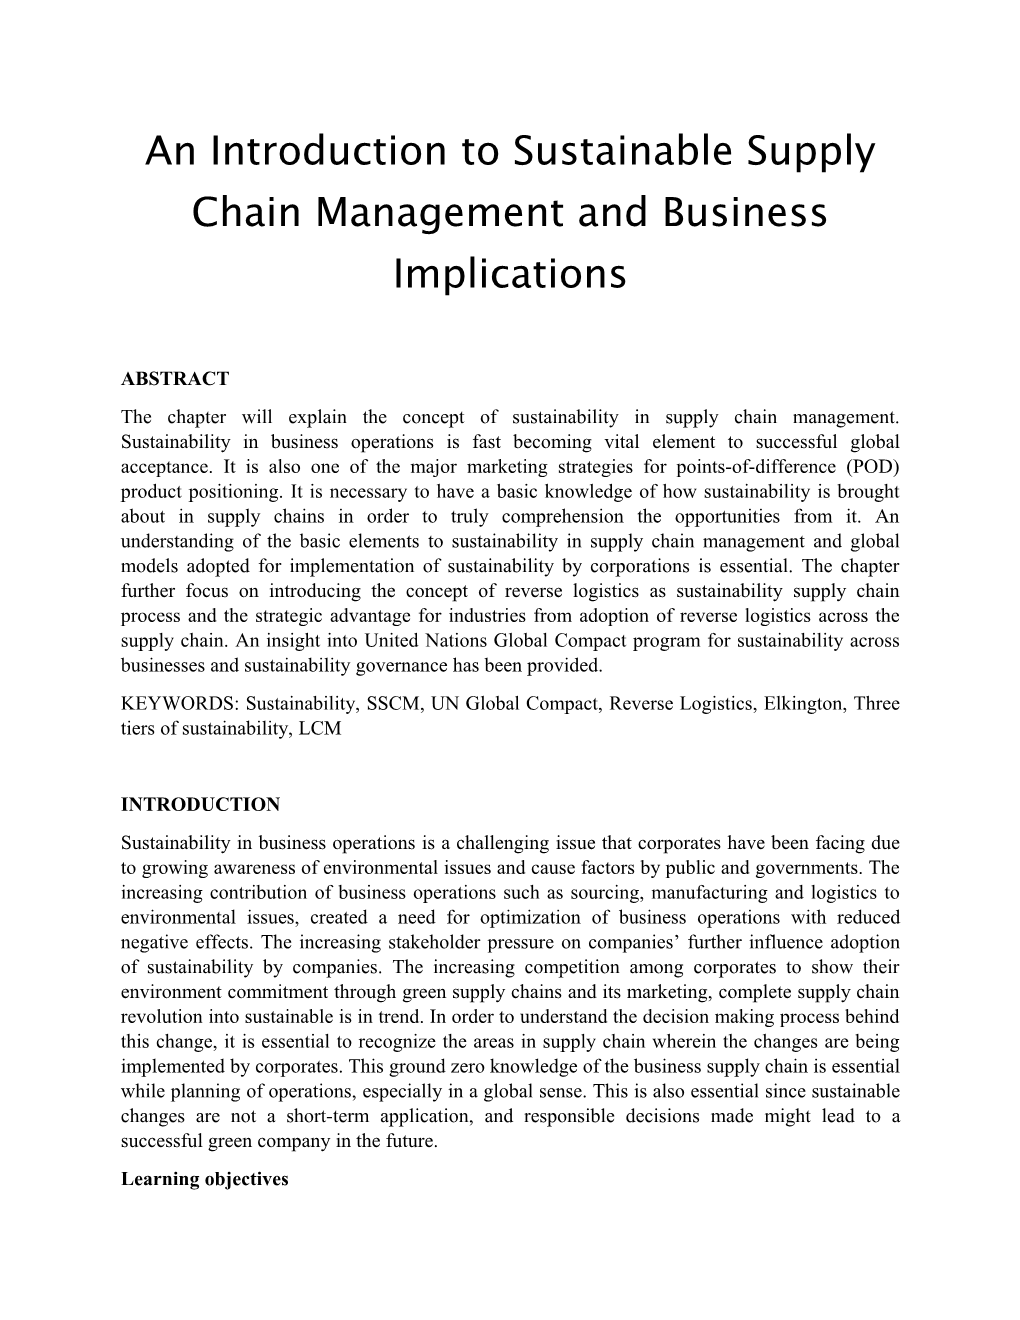 An Introduction to Sustainable Supply Chain Management and Business Implications